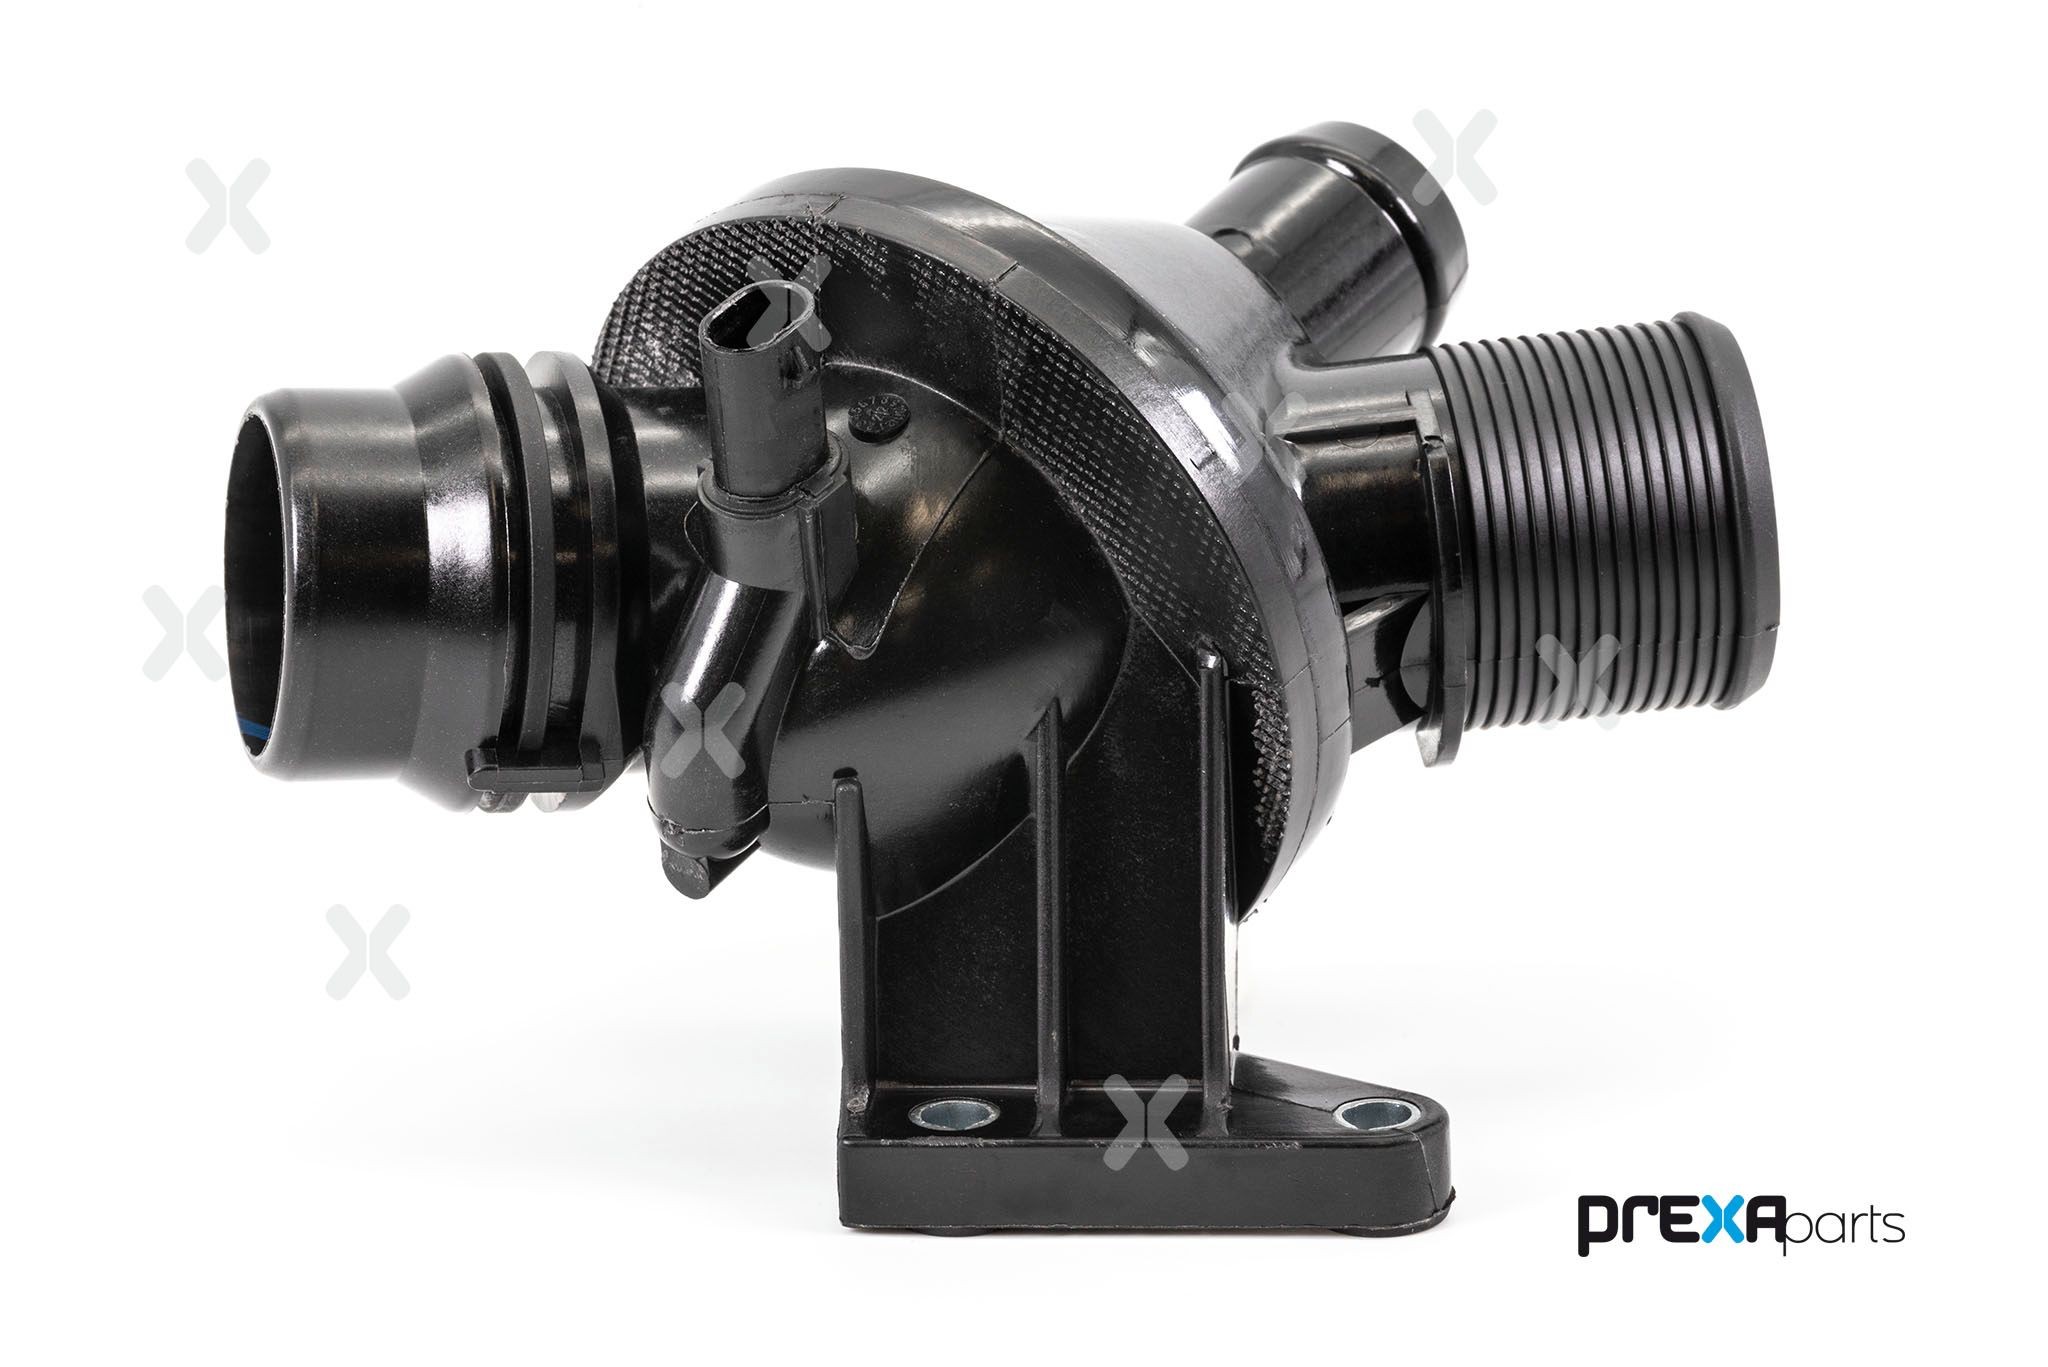 PREXAparts P207016 Thermostat in engine cooling system Opening Temperature: 108°C, with sensor